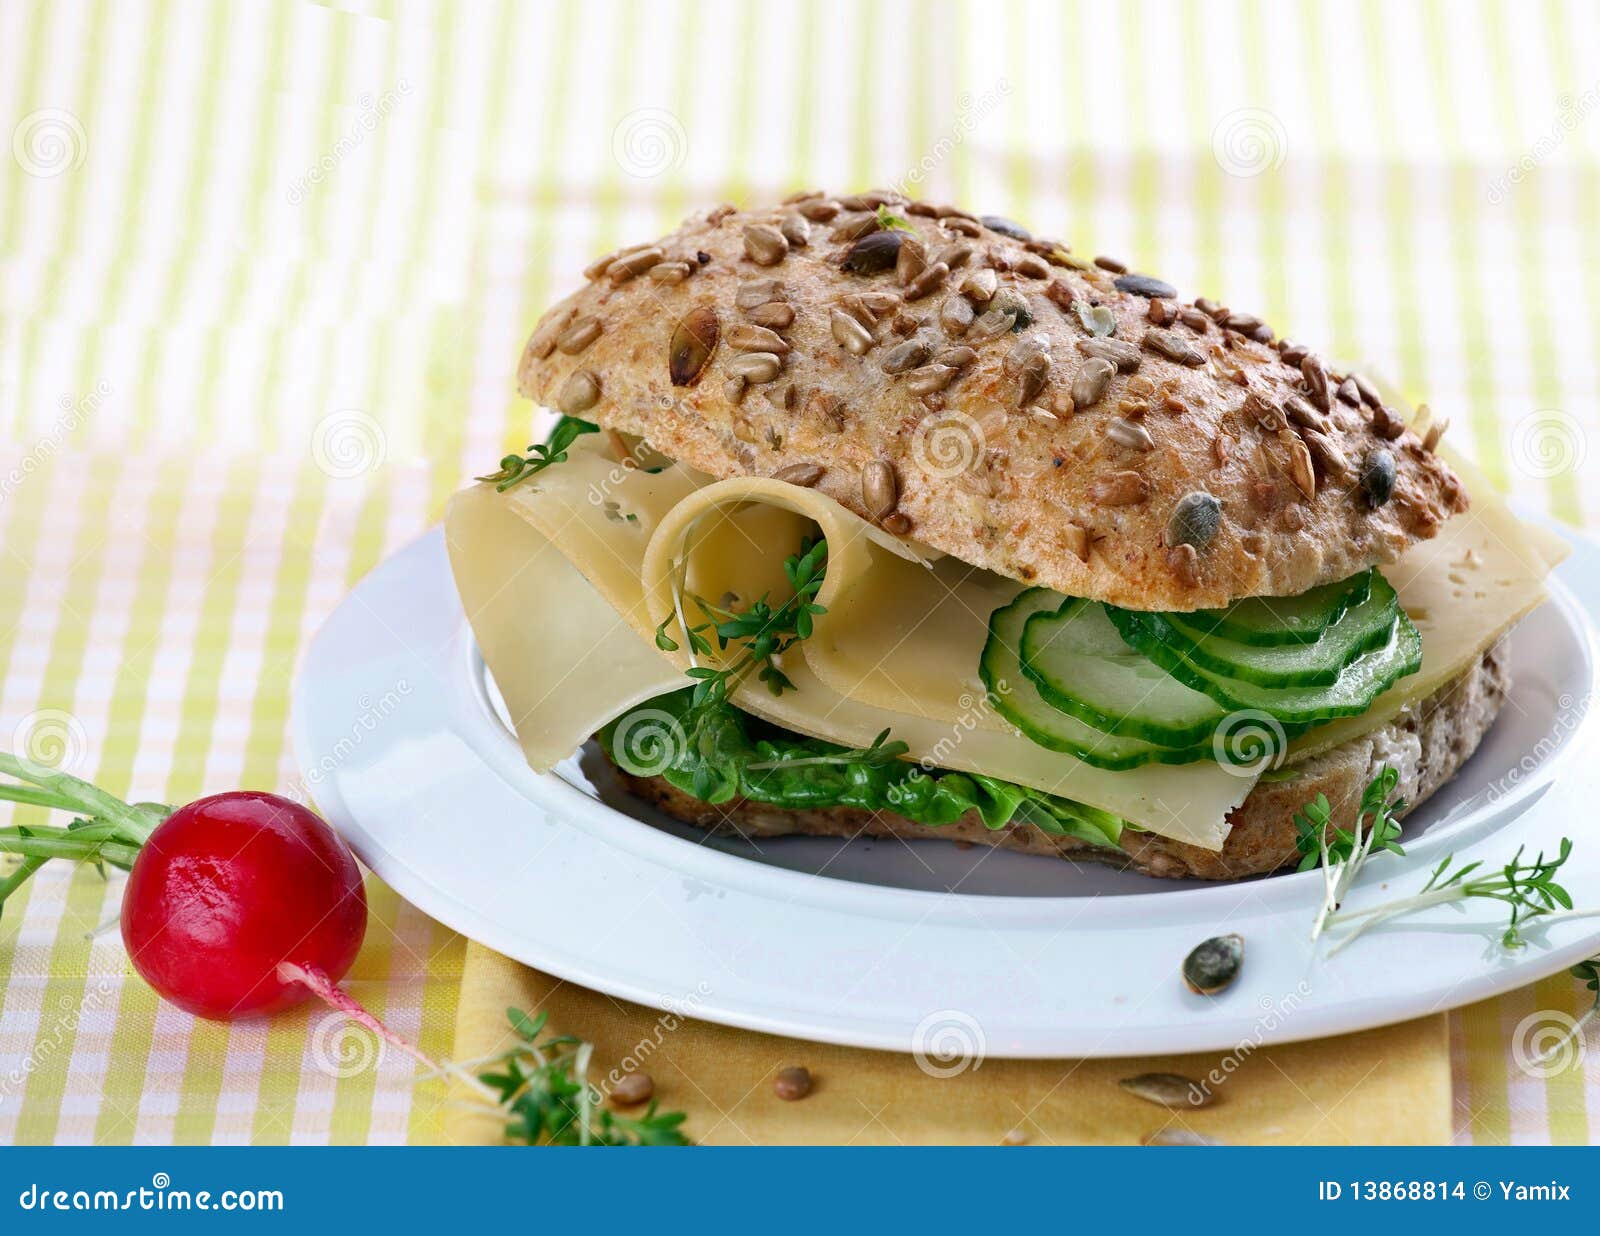 Deli Cheese Sandwich stock photo. Image of cheese, cucumber - 13868814